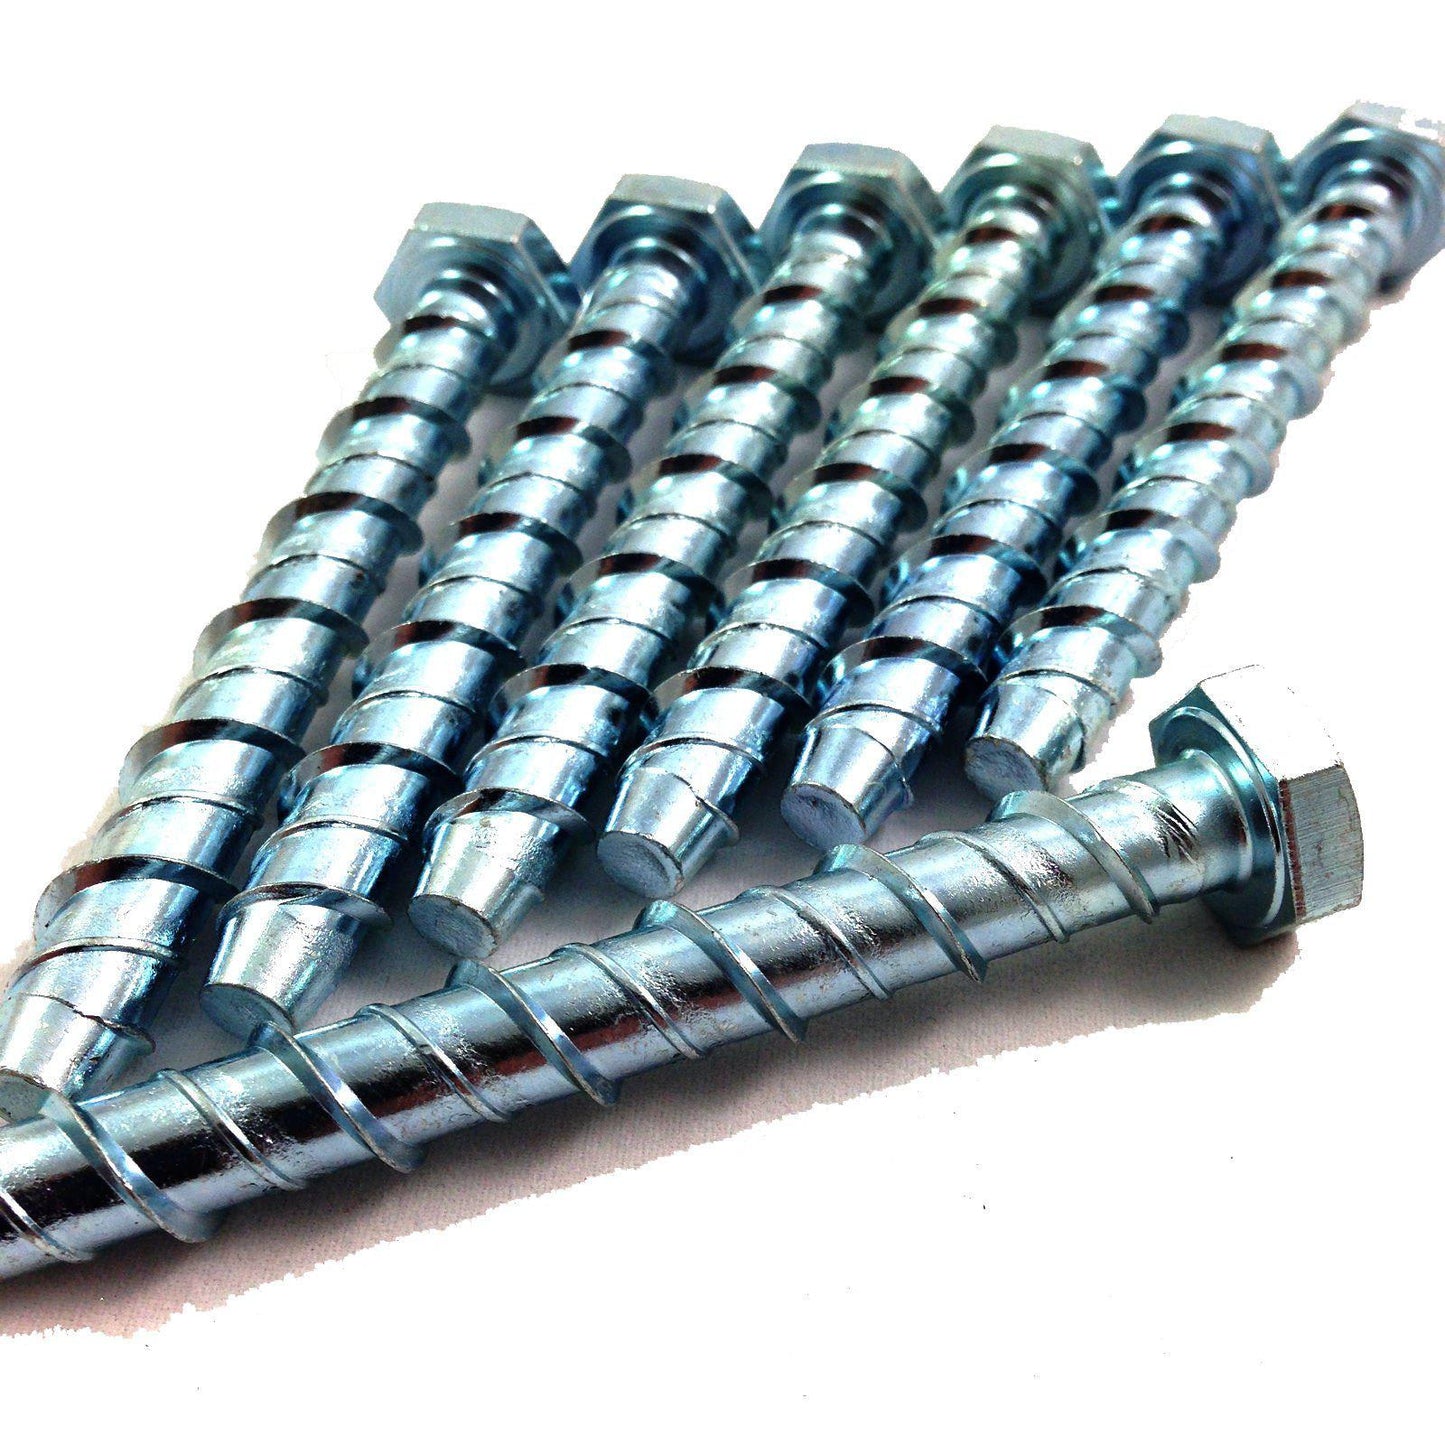 M8, Hex, Concrete Anchor Screw, Self-Tapping, High Tensile, Zinc. Masonry Anchor Fixings M8, Hex, Concrete Anchor Screw, Self-Tapping, High Tensile, Zinc. Concrete Screw - Hex - Heavy Duty